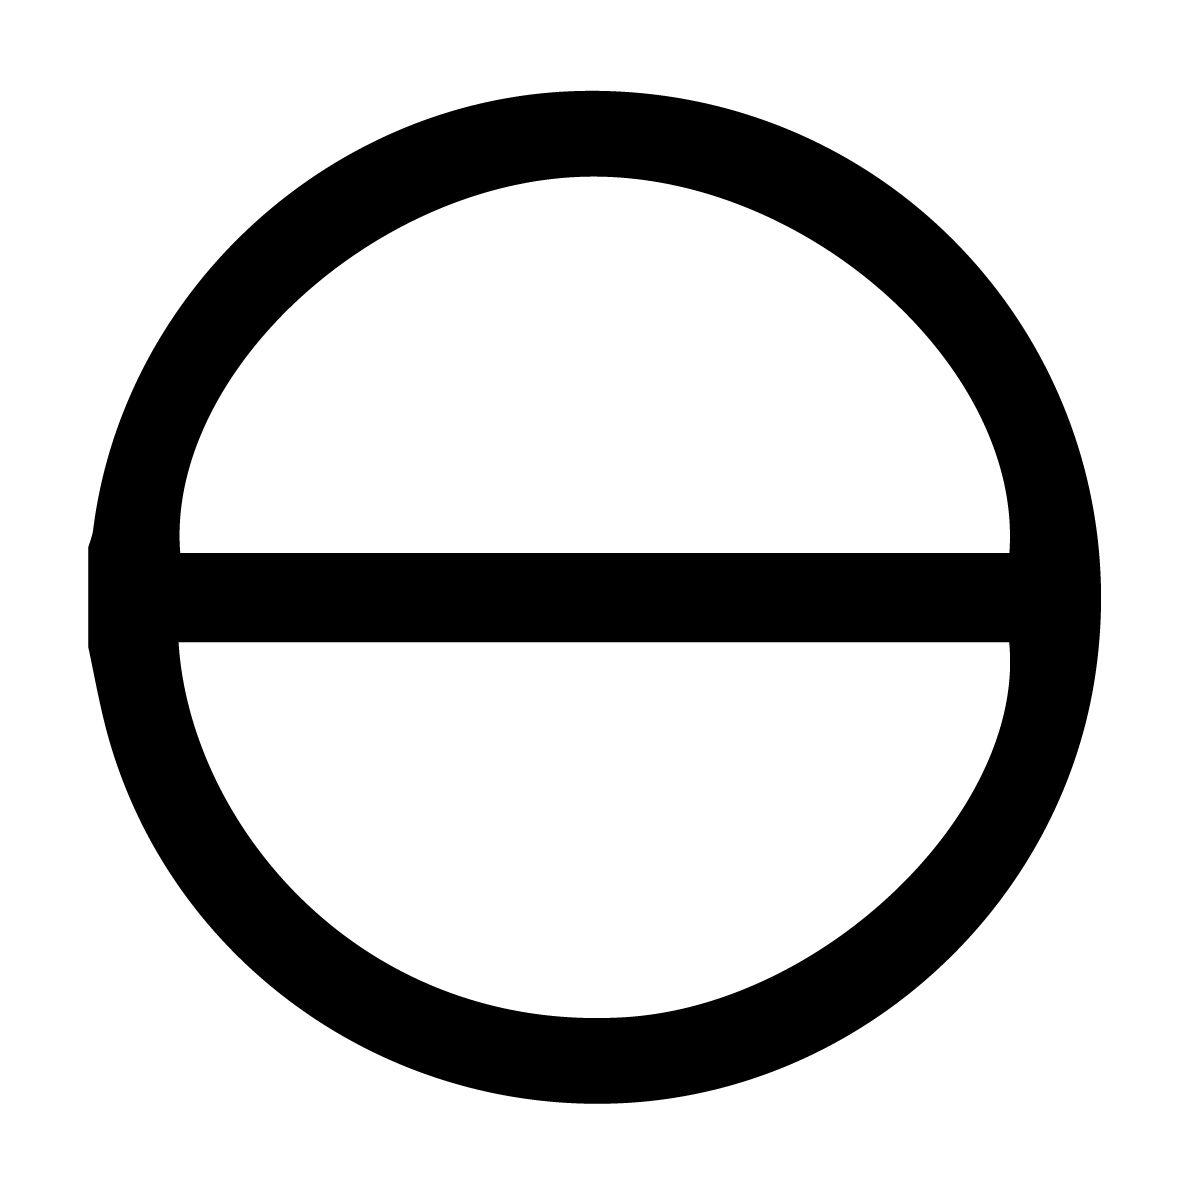 Circle with Line Logo - Alchemy Symbols and Their Meanings - The Extended List of Alchemical ...